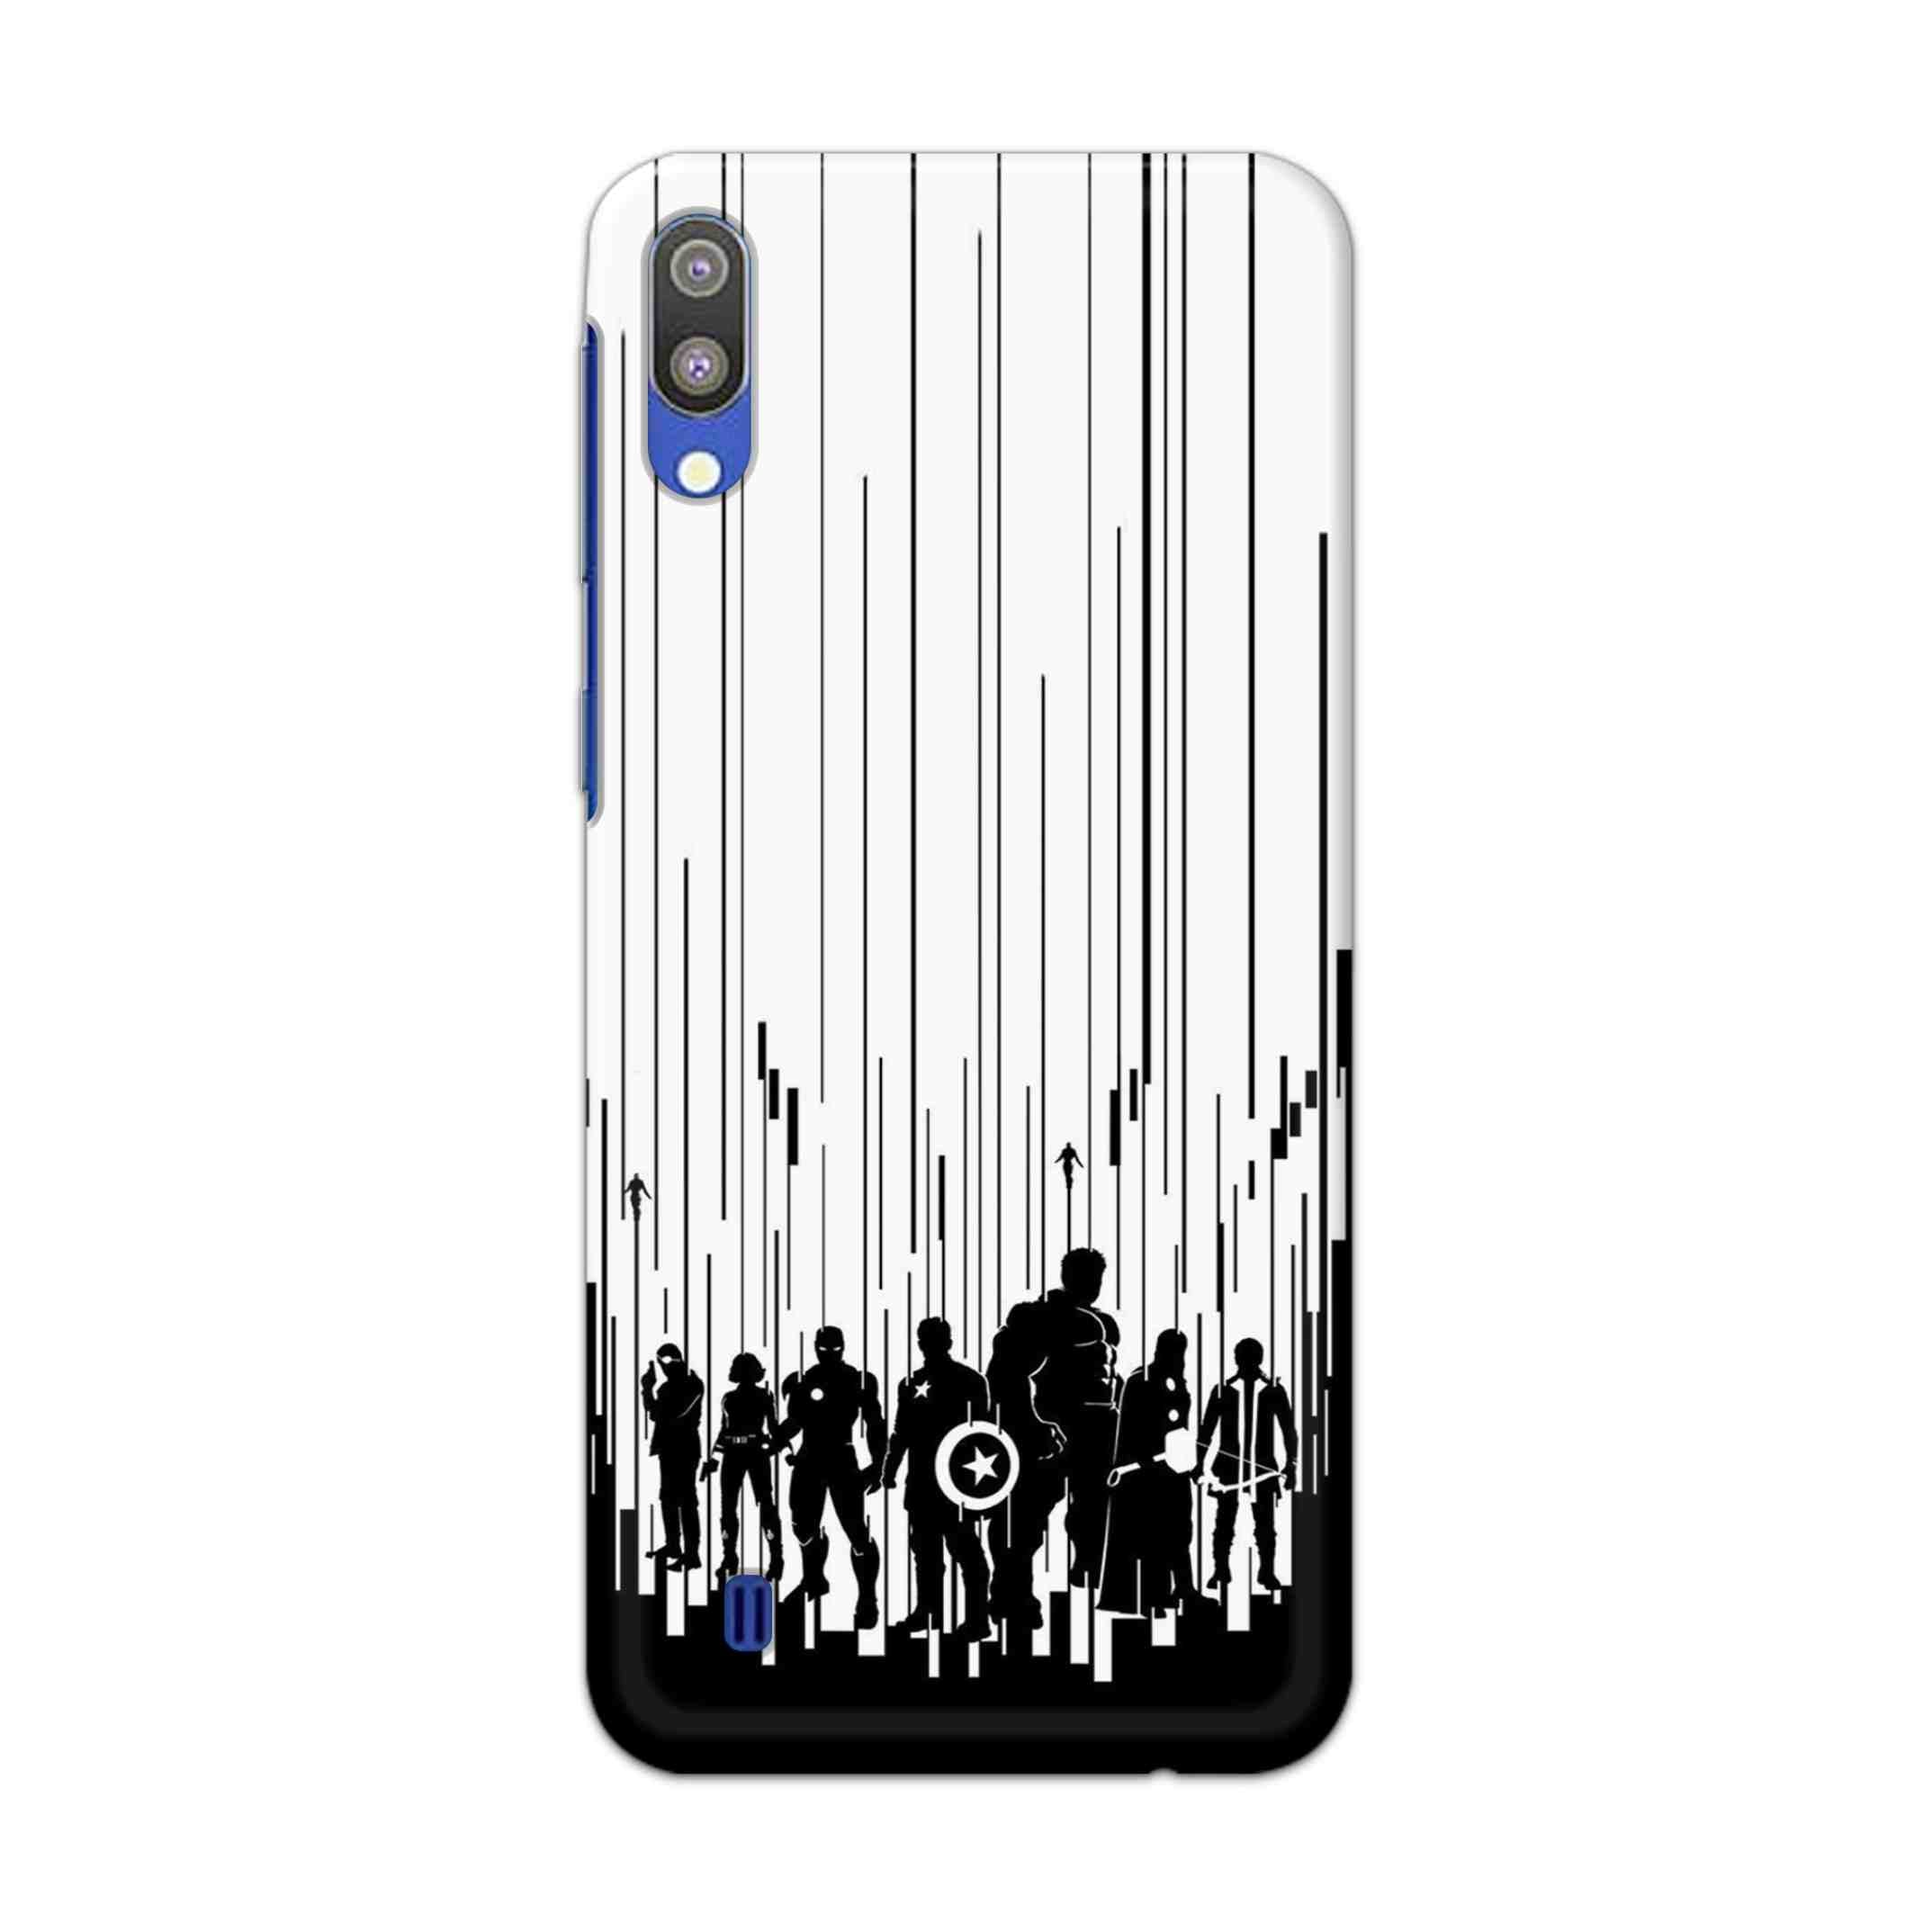 Buy Black And White Avengers Hard Back Mobile Phone Case Cover For Samsung Galaxy M10 Online